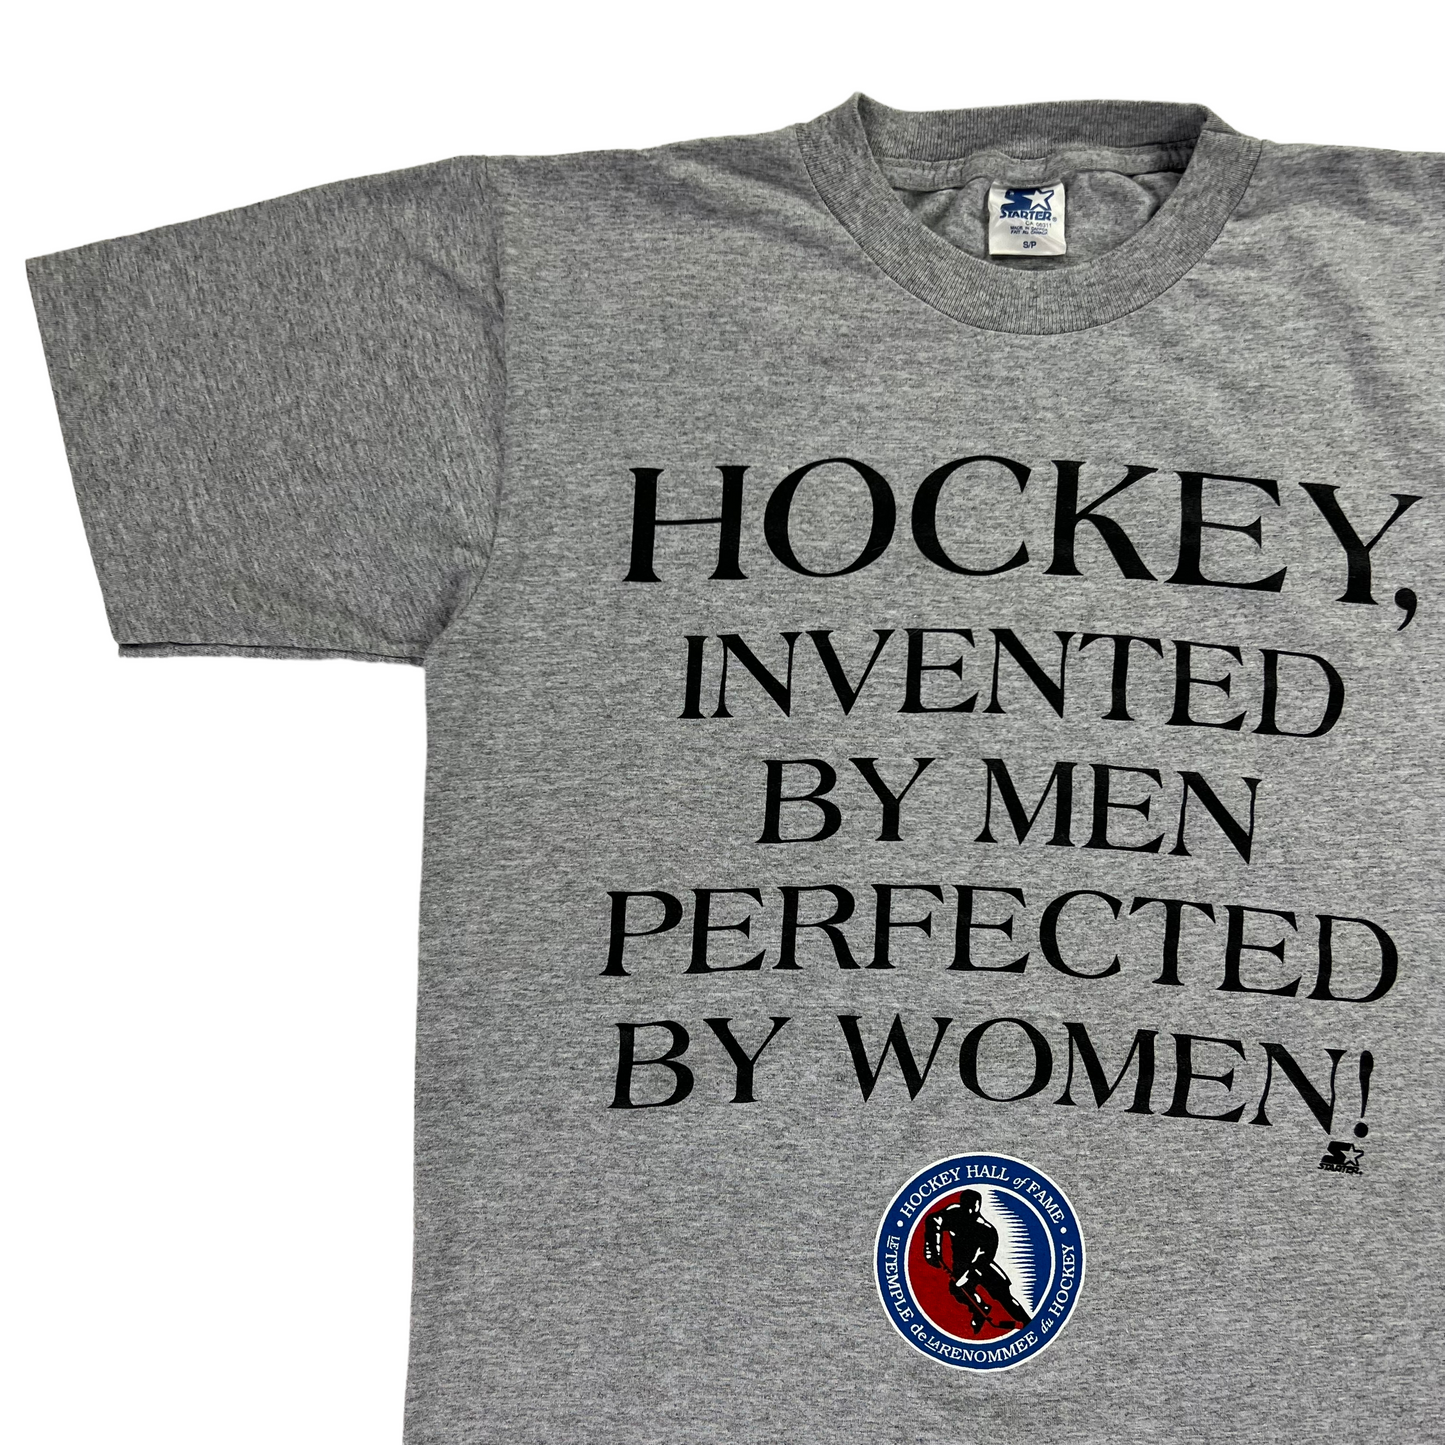 Vintage 90s Starter Hockey. Invented by men perfected by women. Hockey hall of fame tee (S)